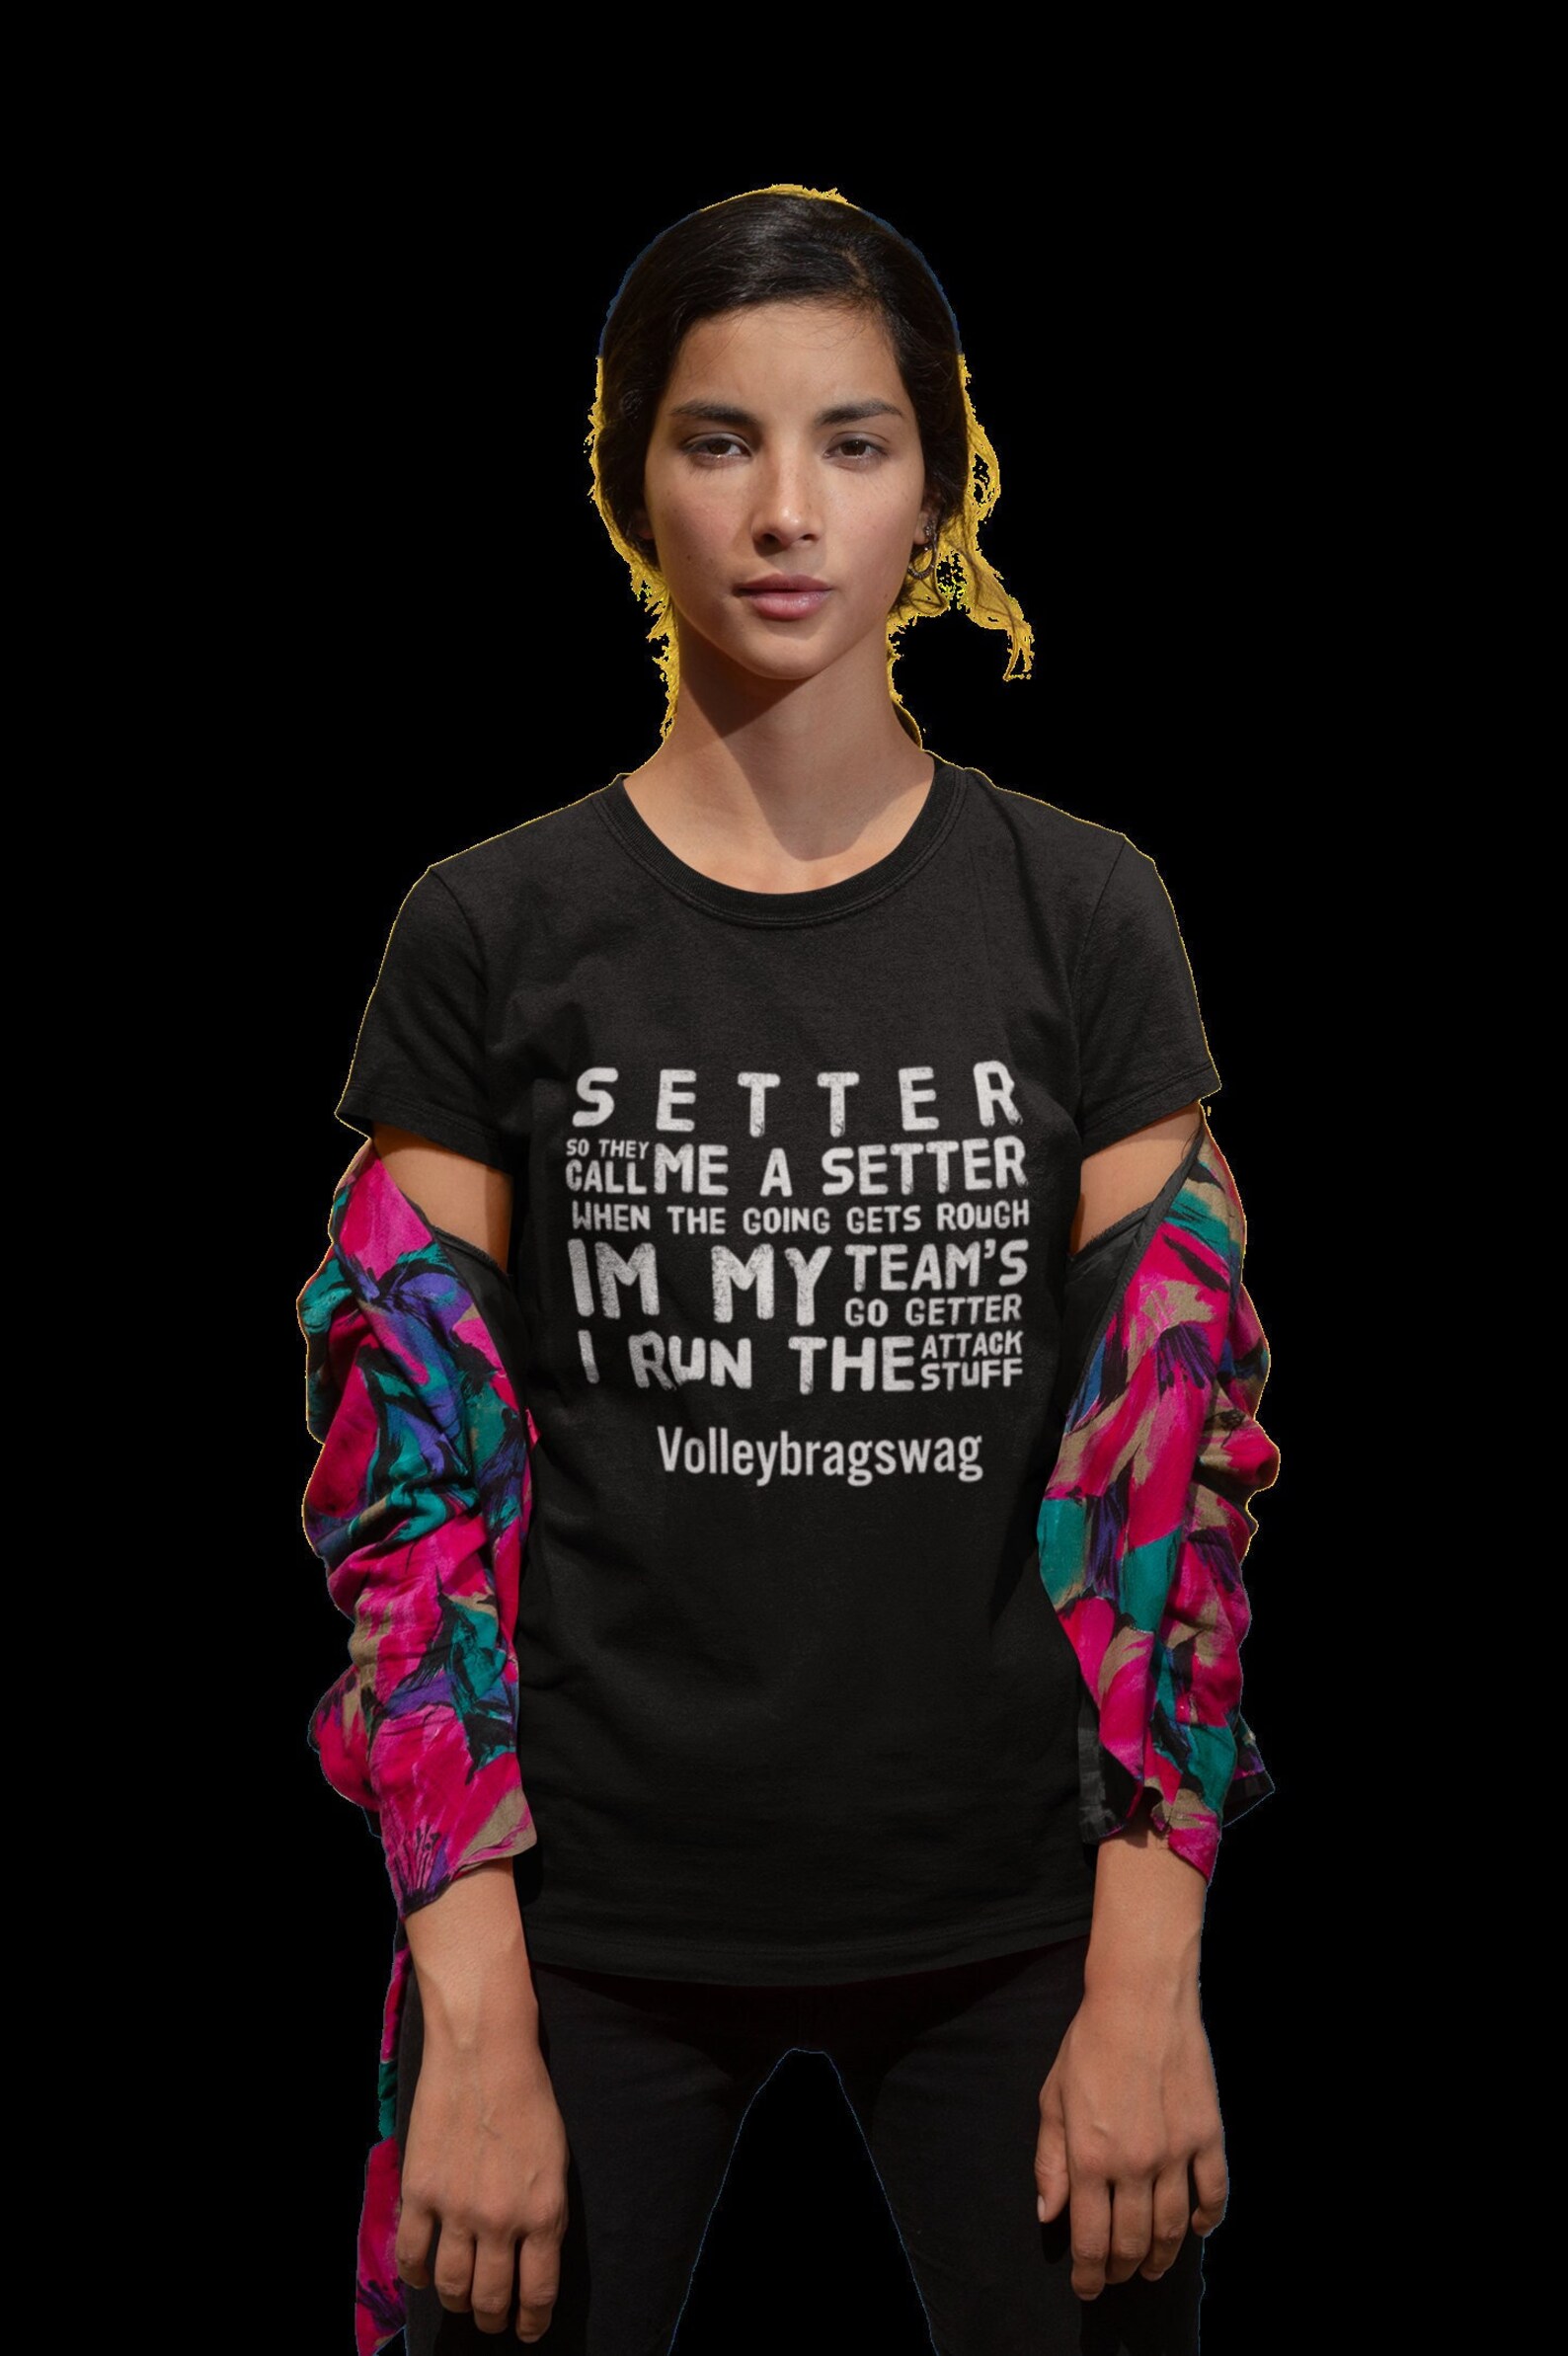 SETTER So They Call Me A Setter When The Going Gets Rough Im My Team's Go Getter I Run The Attack Stuff is a shirt in my shop with one of the best selling volleyball setting quotes.